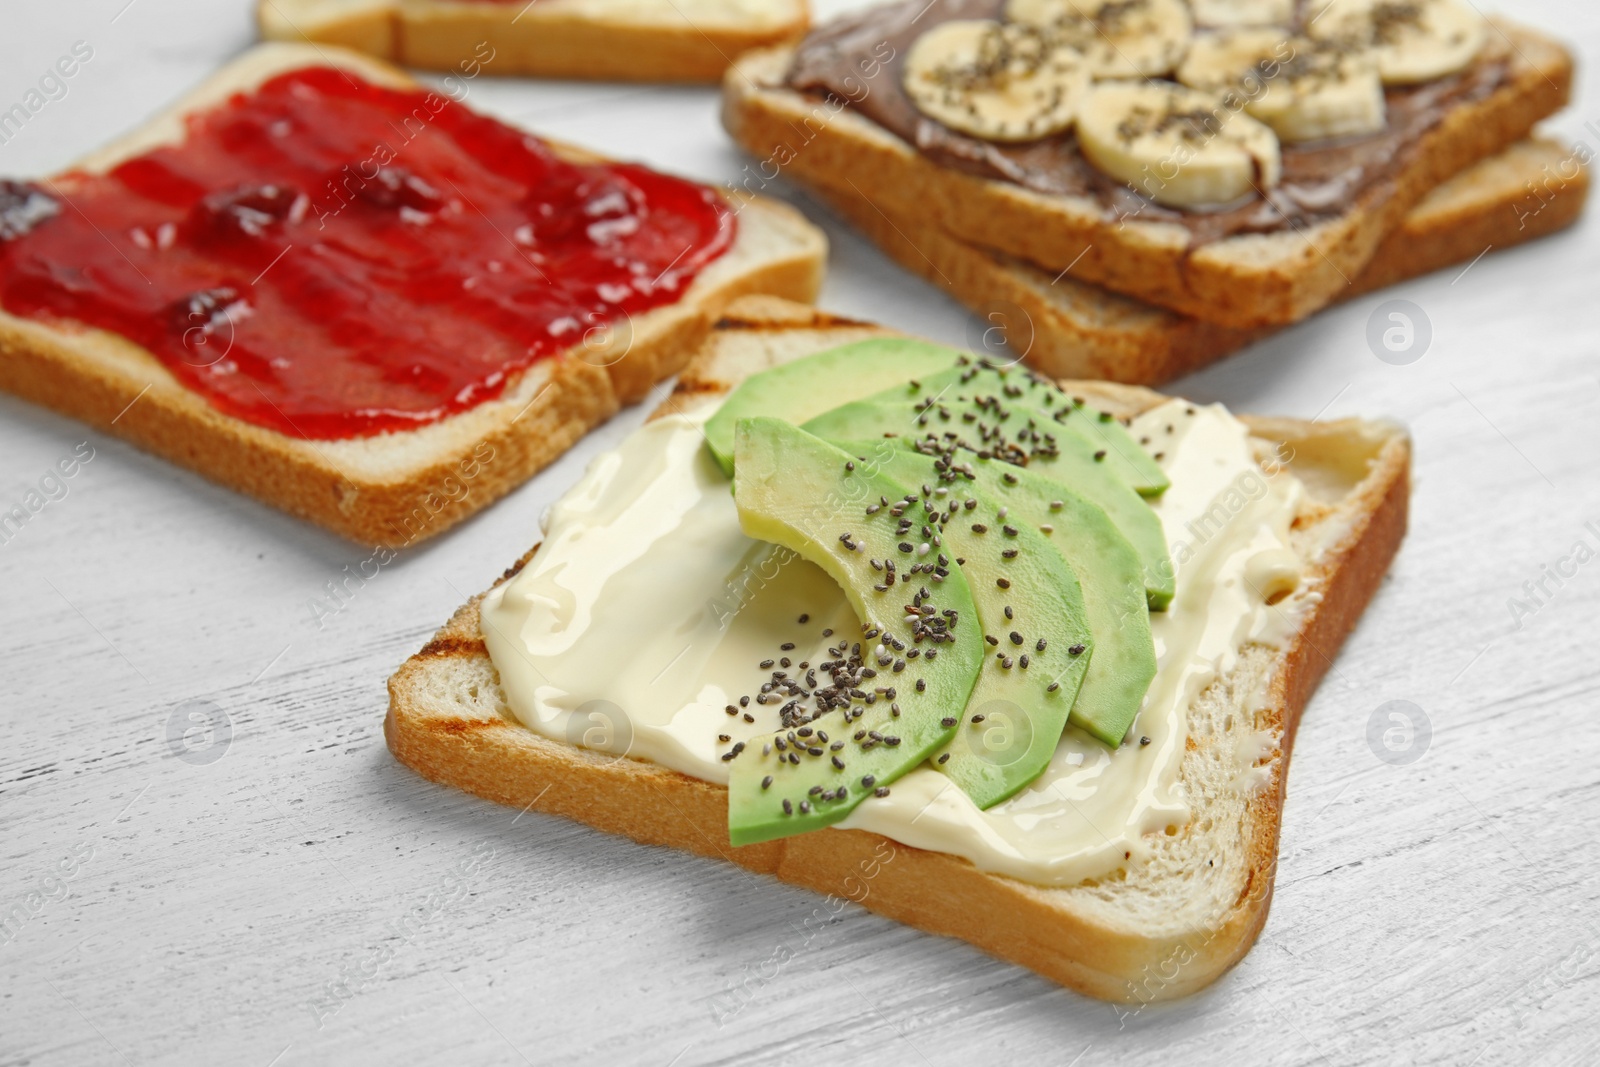 Photo of Slices of bread with different toppings on white wooden table